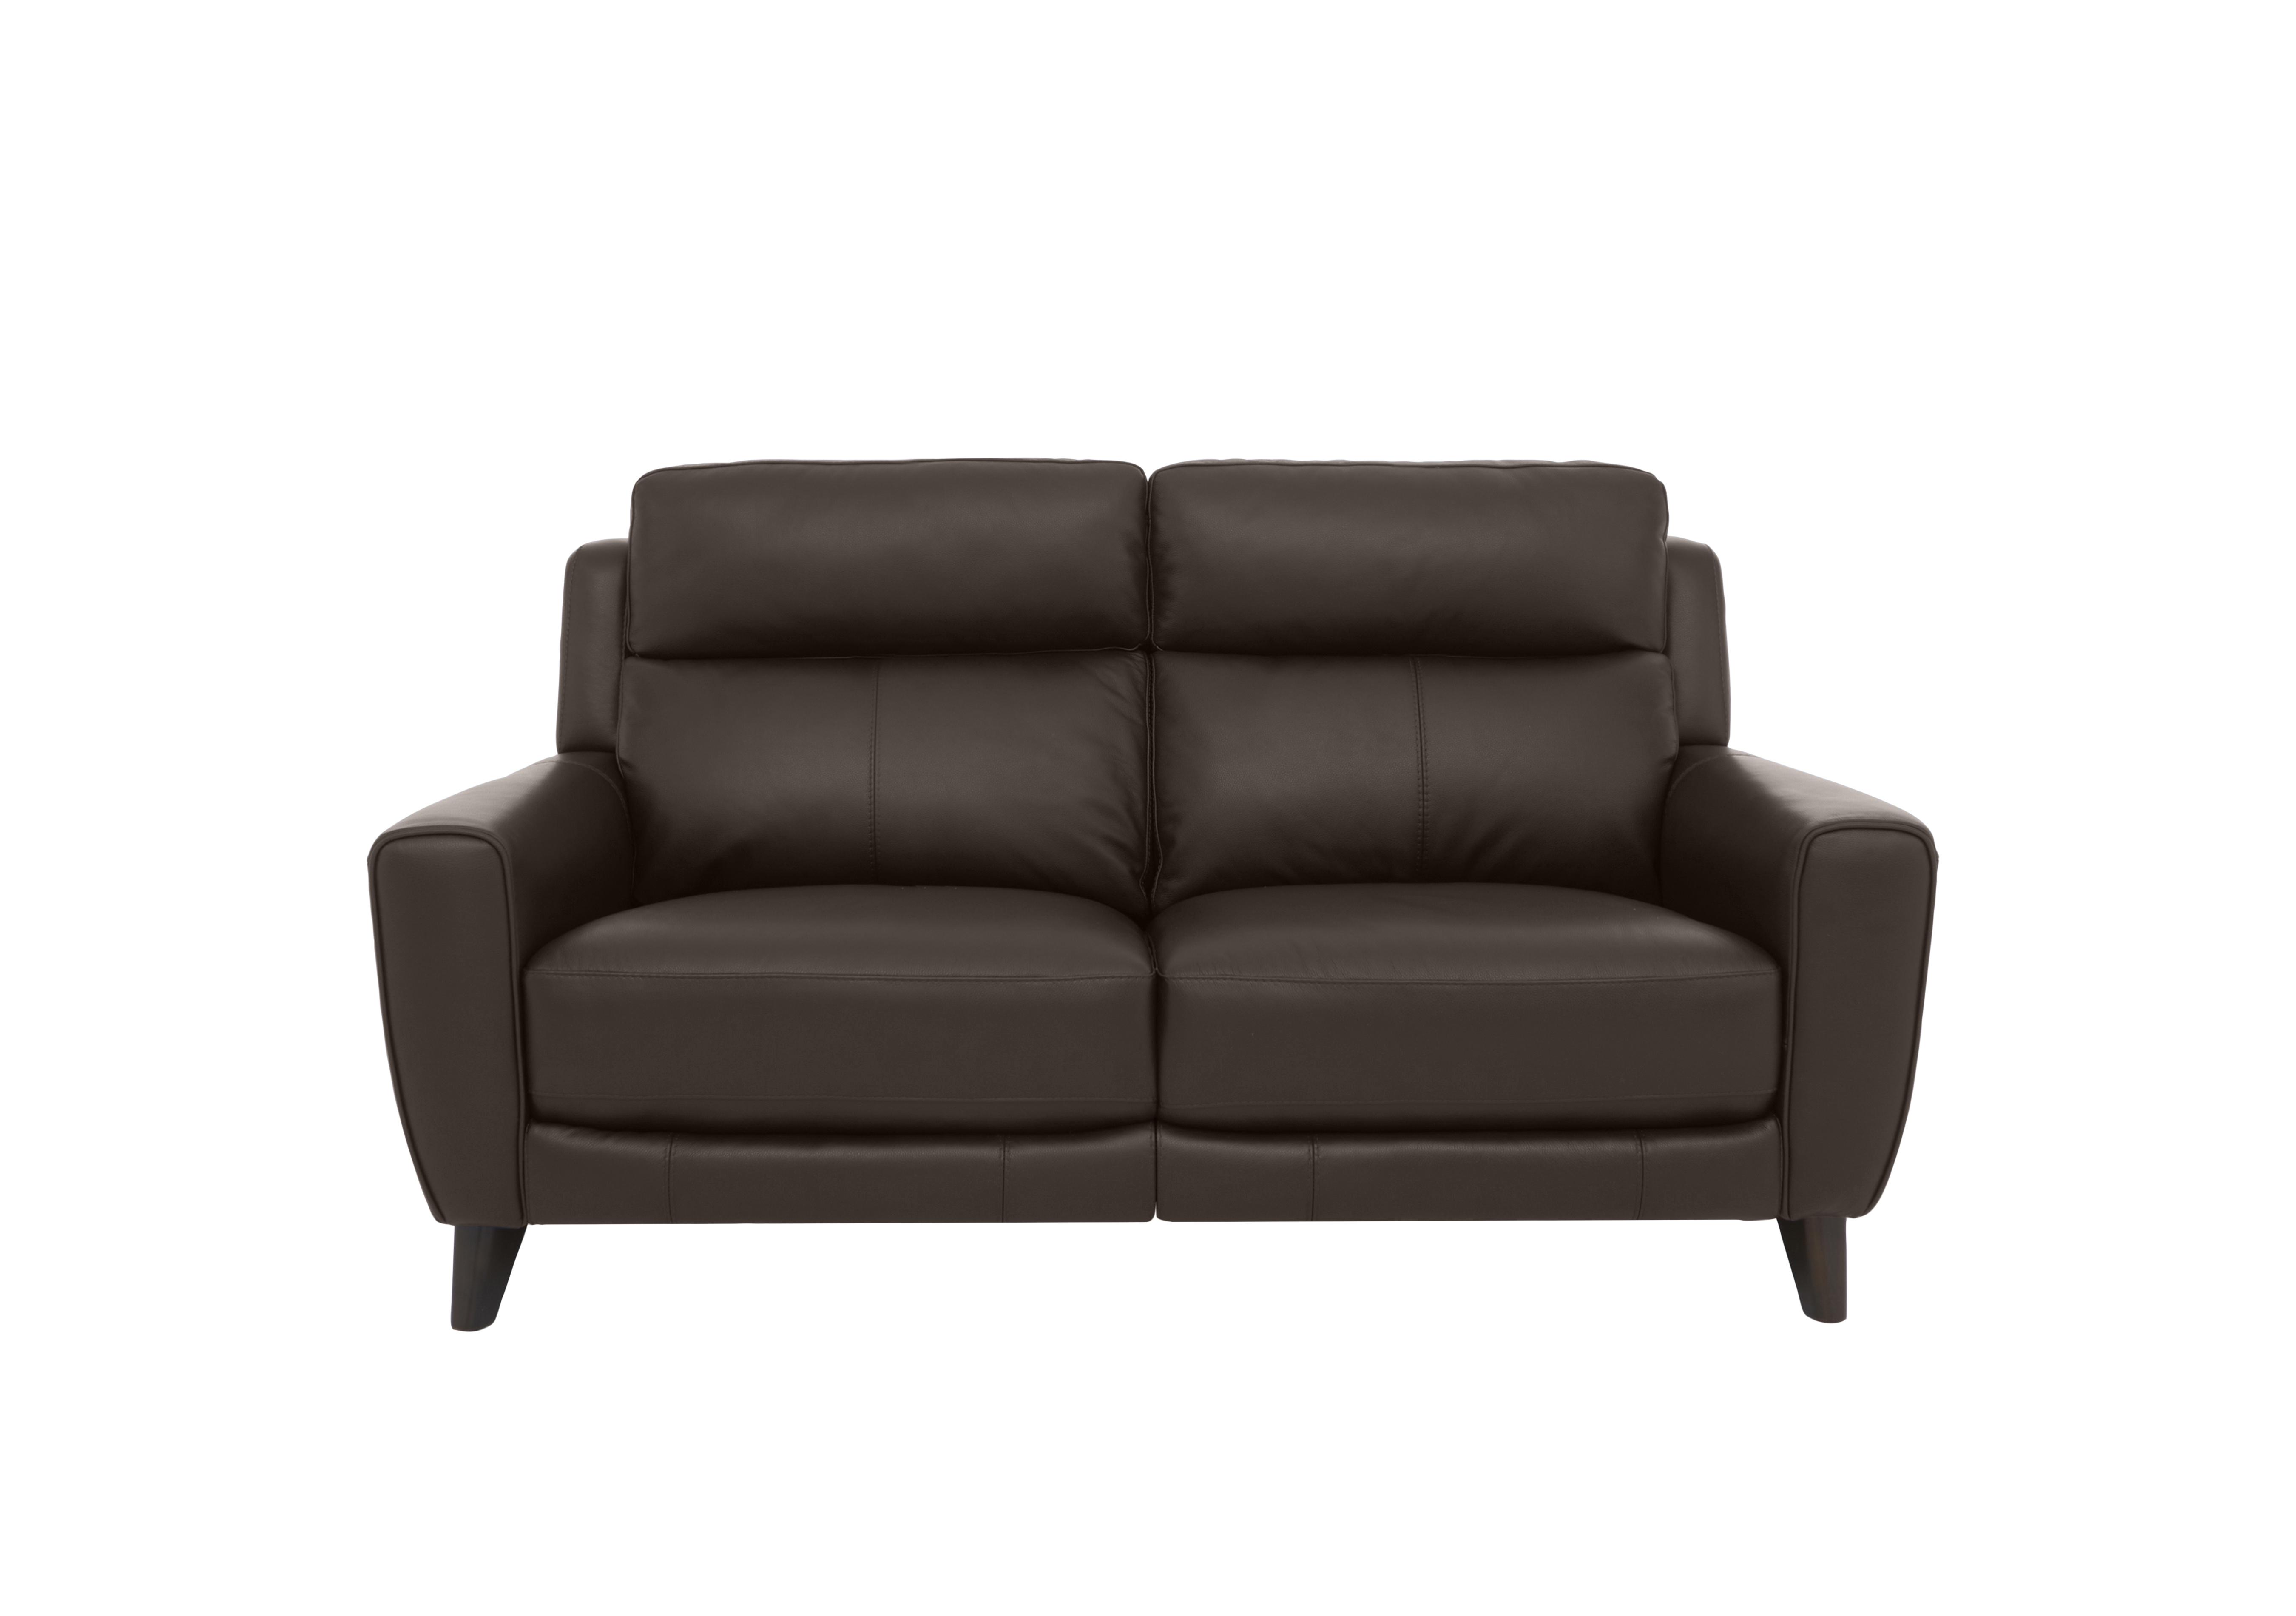 Zen 2 Seater Leather Power Recliner Sofa with Power Headrests in Bx-037c Walnut on Furniture Village